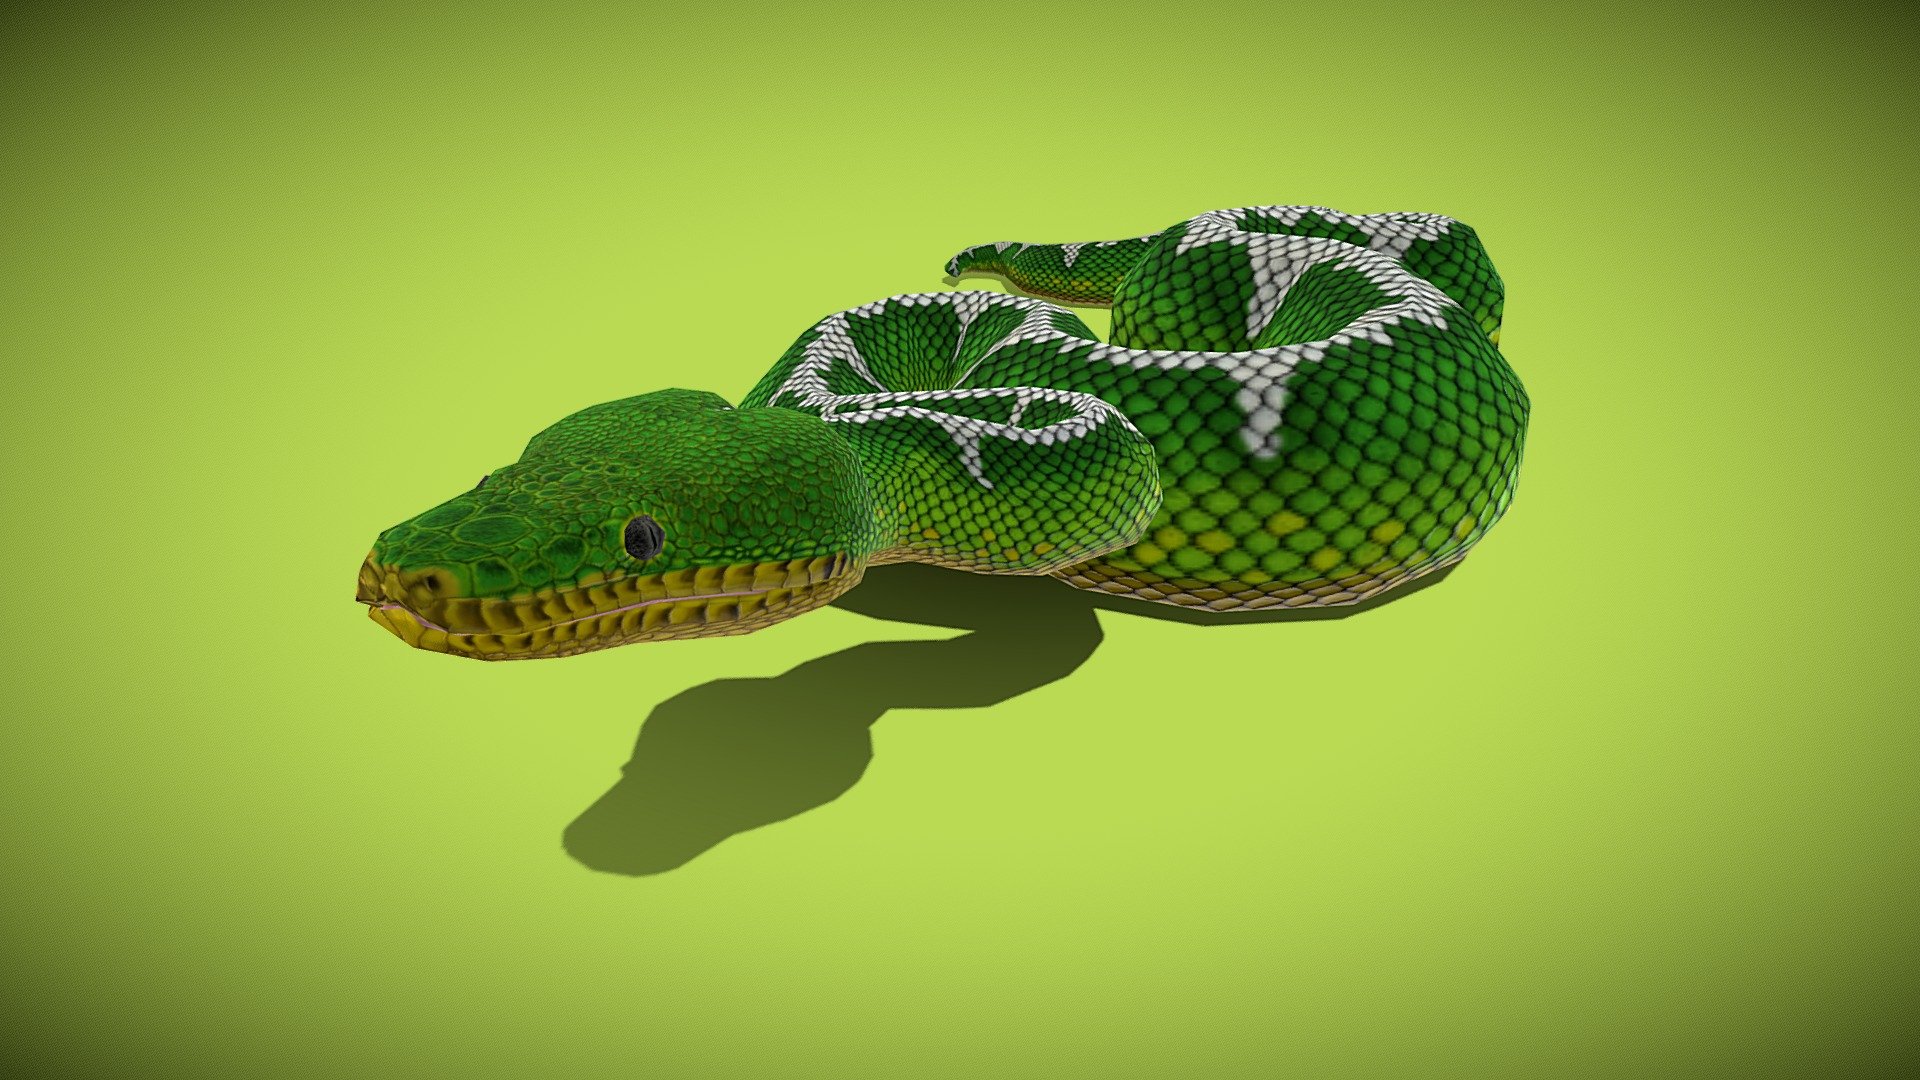 A simple low poly snake model. This is an Emerald Tree Boa.
This model was used as part of the Augmented Reality features of The Living Rainforest Explorer app which is now available for Android and iOS.
Google Play: https://play.google.com/store/apps/details?id=org.trustforsustainableliving.livingrainforest&amp;hl=en_GB&amp;gl=US
Apple app store: https://apps.apple.com/us/app/the-living-rainforest-explorer/id1572807135?uo=2 - Emerald Tree Boa - 3D model by leeprobert 3d model